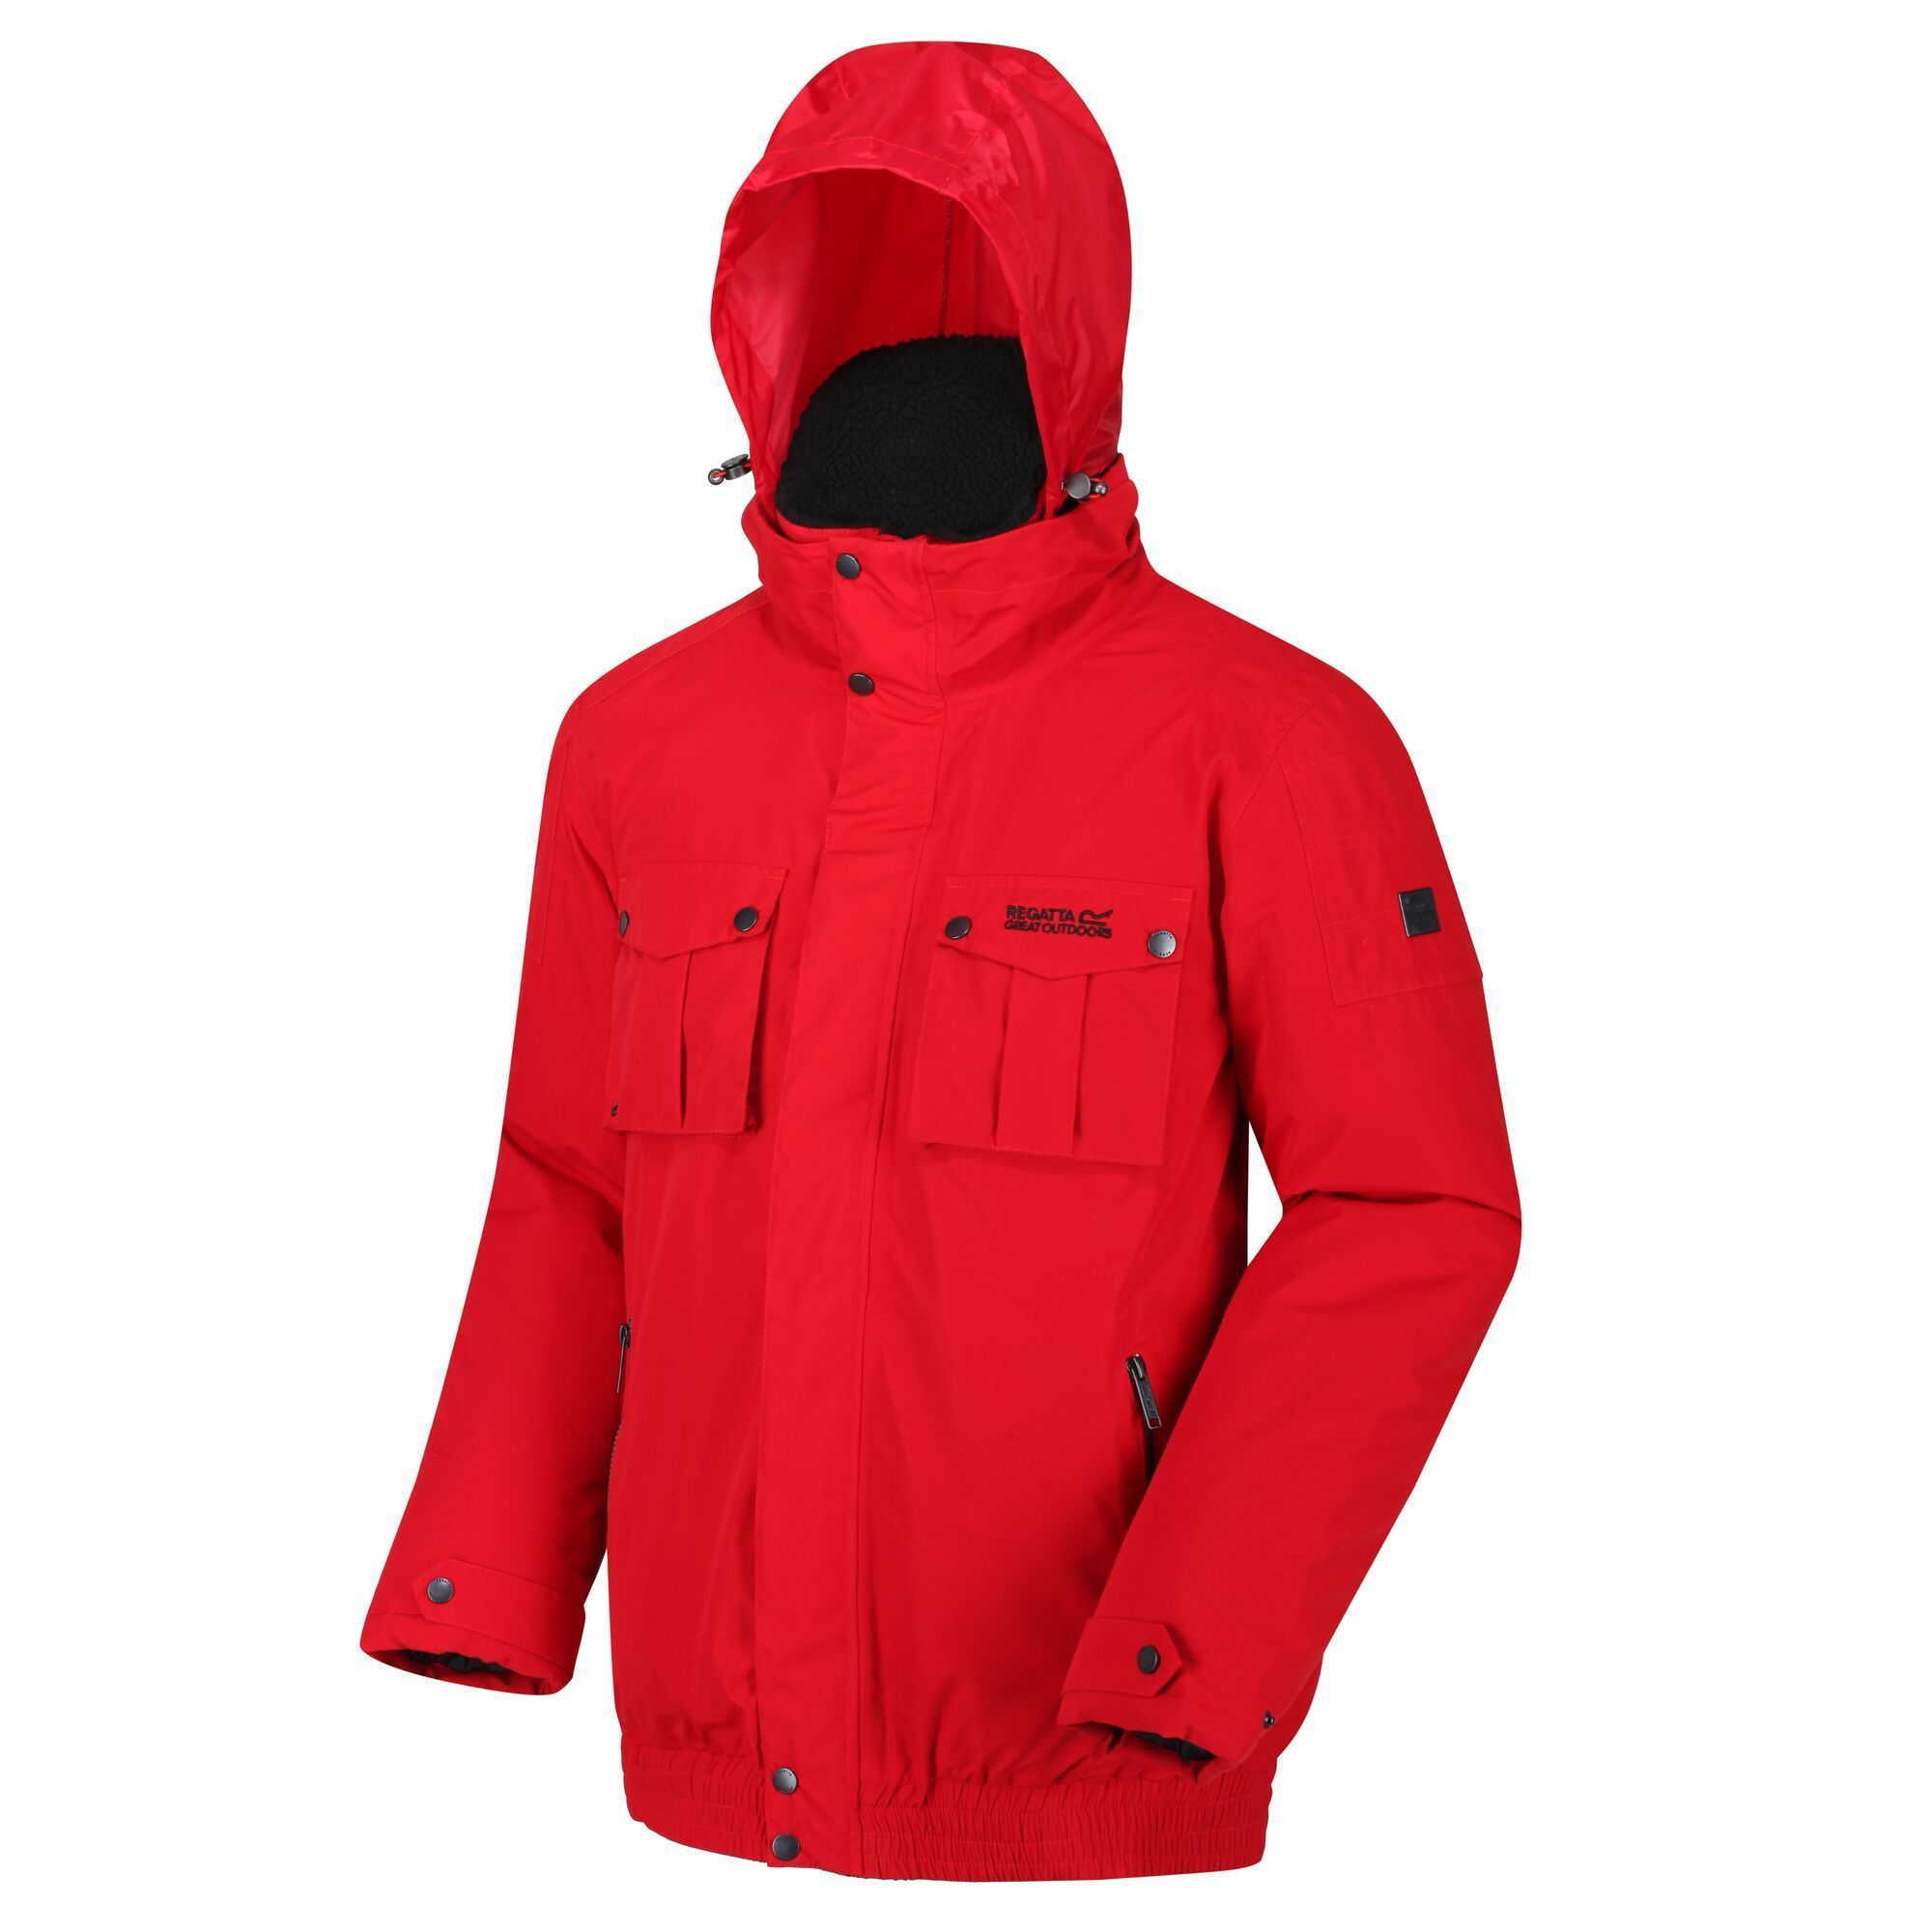 Material: polyester: 100%. Waterproof and breathable Isotex 5000 peached polyester fabric. Breathability rating: 5,000g/m2/24hrs. Taped seams. Durable water repellent finish. Polyester taffeta lining. Internal security pocket. Lightweight concealed hood with adjusters. Sherpa fleece inner collar. Adjustable cuffs with snap fastening. 2 zipped lower pockets. 2 chest patch pockets. Elasticated hem. Regatta outdoors badge on left sleeve. Size (chest): (XXS) 32-34in/81-86cm, (XS) 35-36in/89-91.5cm, (S) 37-38in/94-96.5cm, (M) 39-40in/99-101.5cm, (L) 41-42in/104-106.5cm, (XL) 43-44in/109-112cm, (XXL) 46-48in/117-122cm, (3XL) 49-51in/124.5-129.5cm, (4XL) 52-54in/132-137cm, (5XL) 55-57in/140-145cm, (6XL) 58-60in/147-152.5cm.